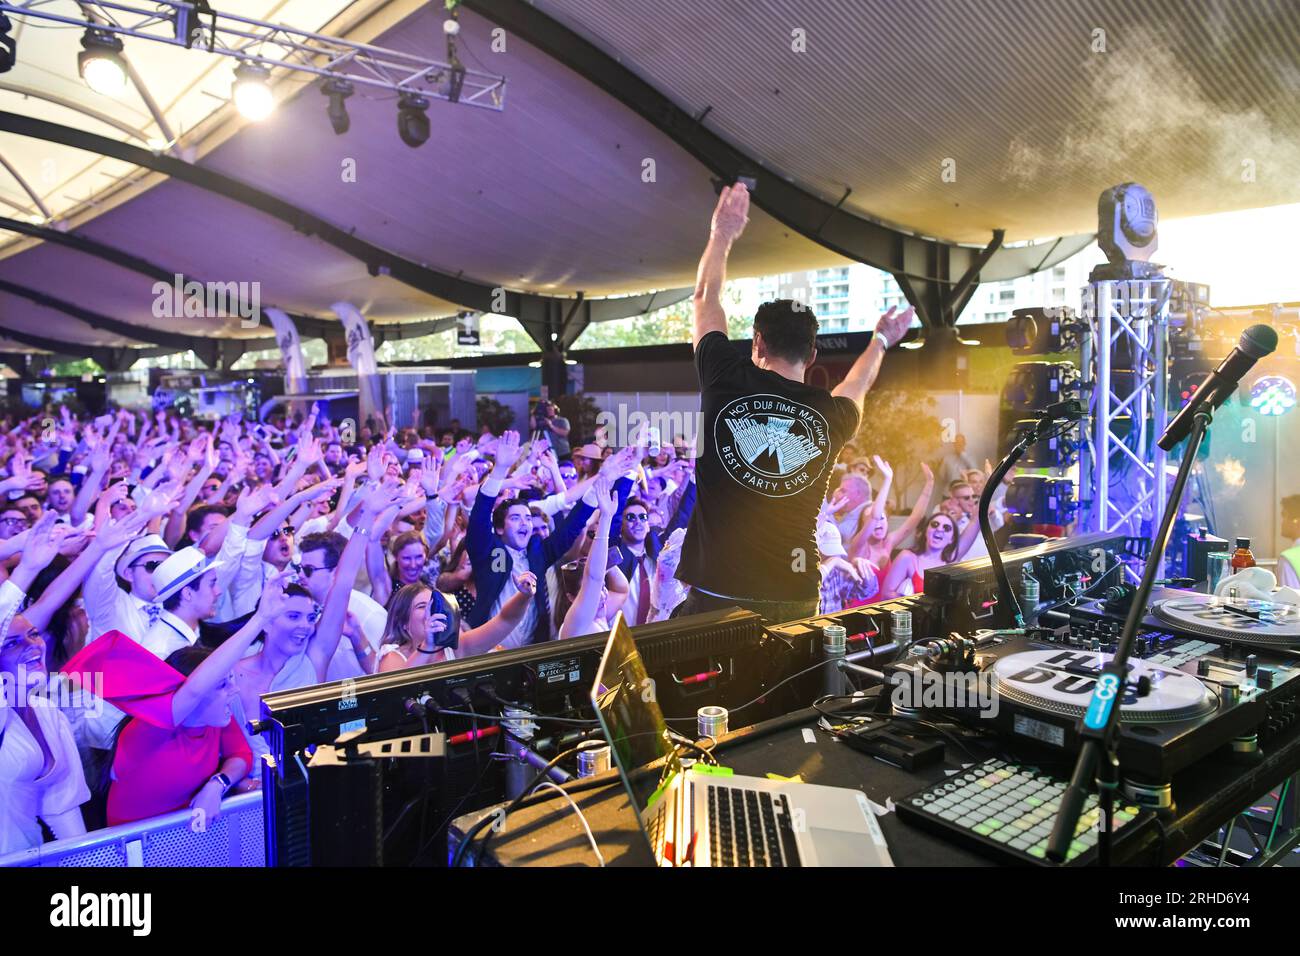 Sydney, Australia - November 2nd 2019 - Tom Lowndes (DJ Tom Loud), known professionally as Hot Dub Time Machine, an Australian DJ known for being the Stock Photo